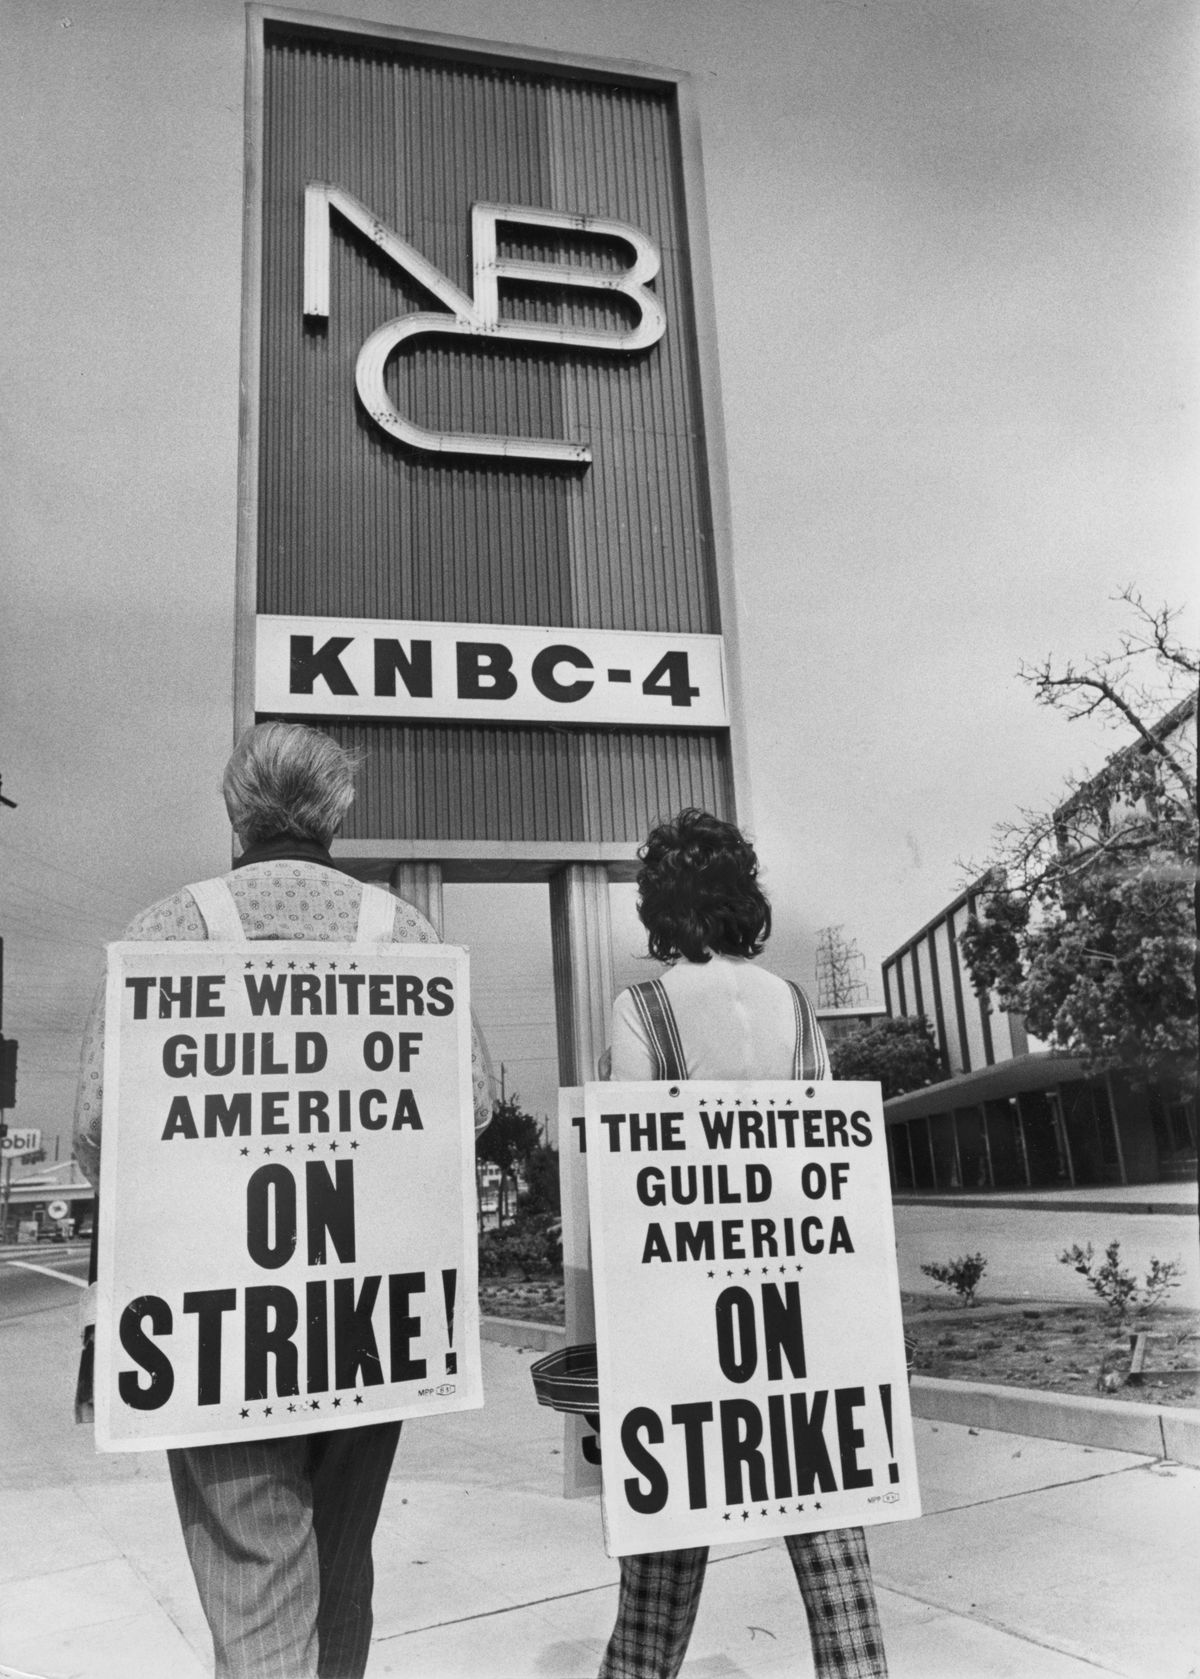 Two writers on strike in front of the NBC office.